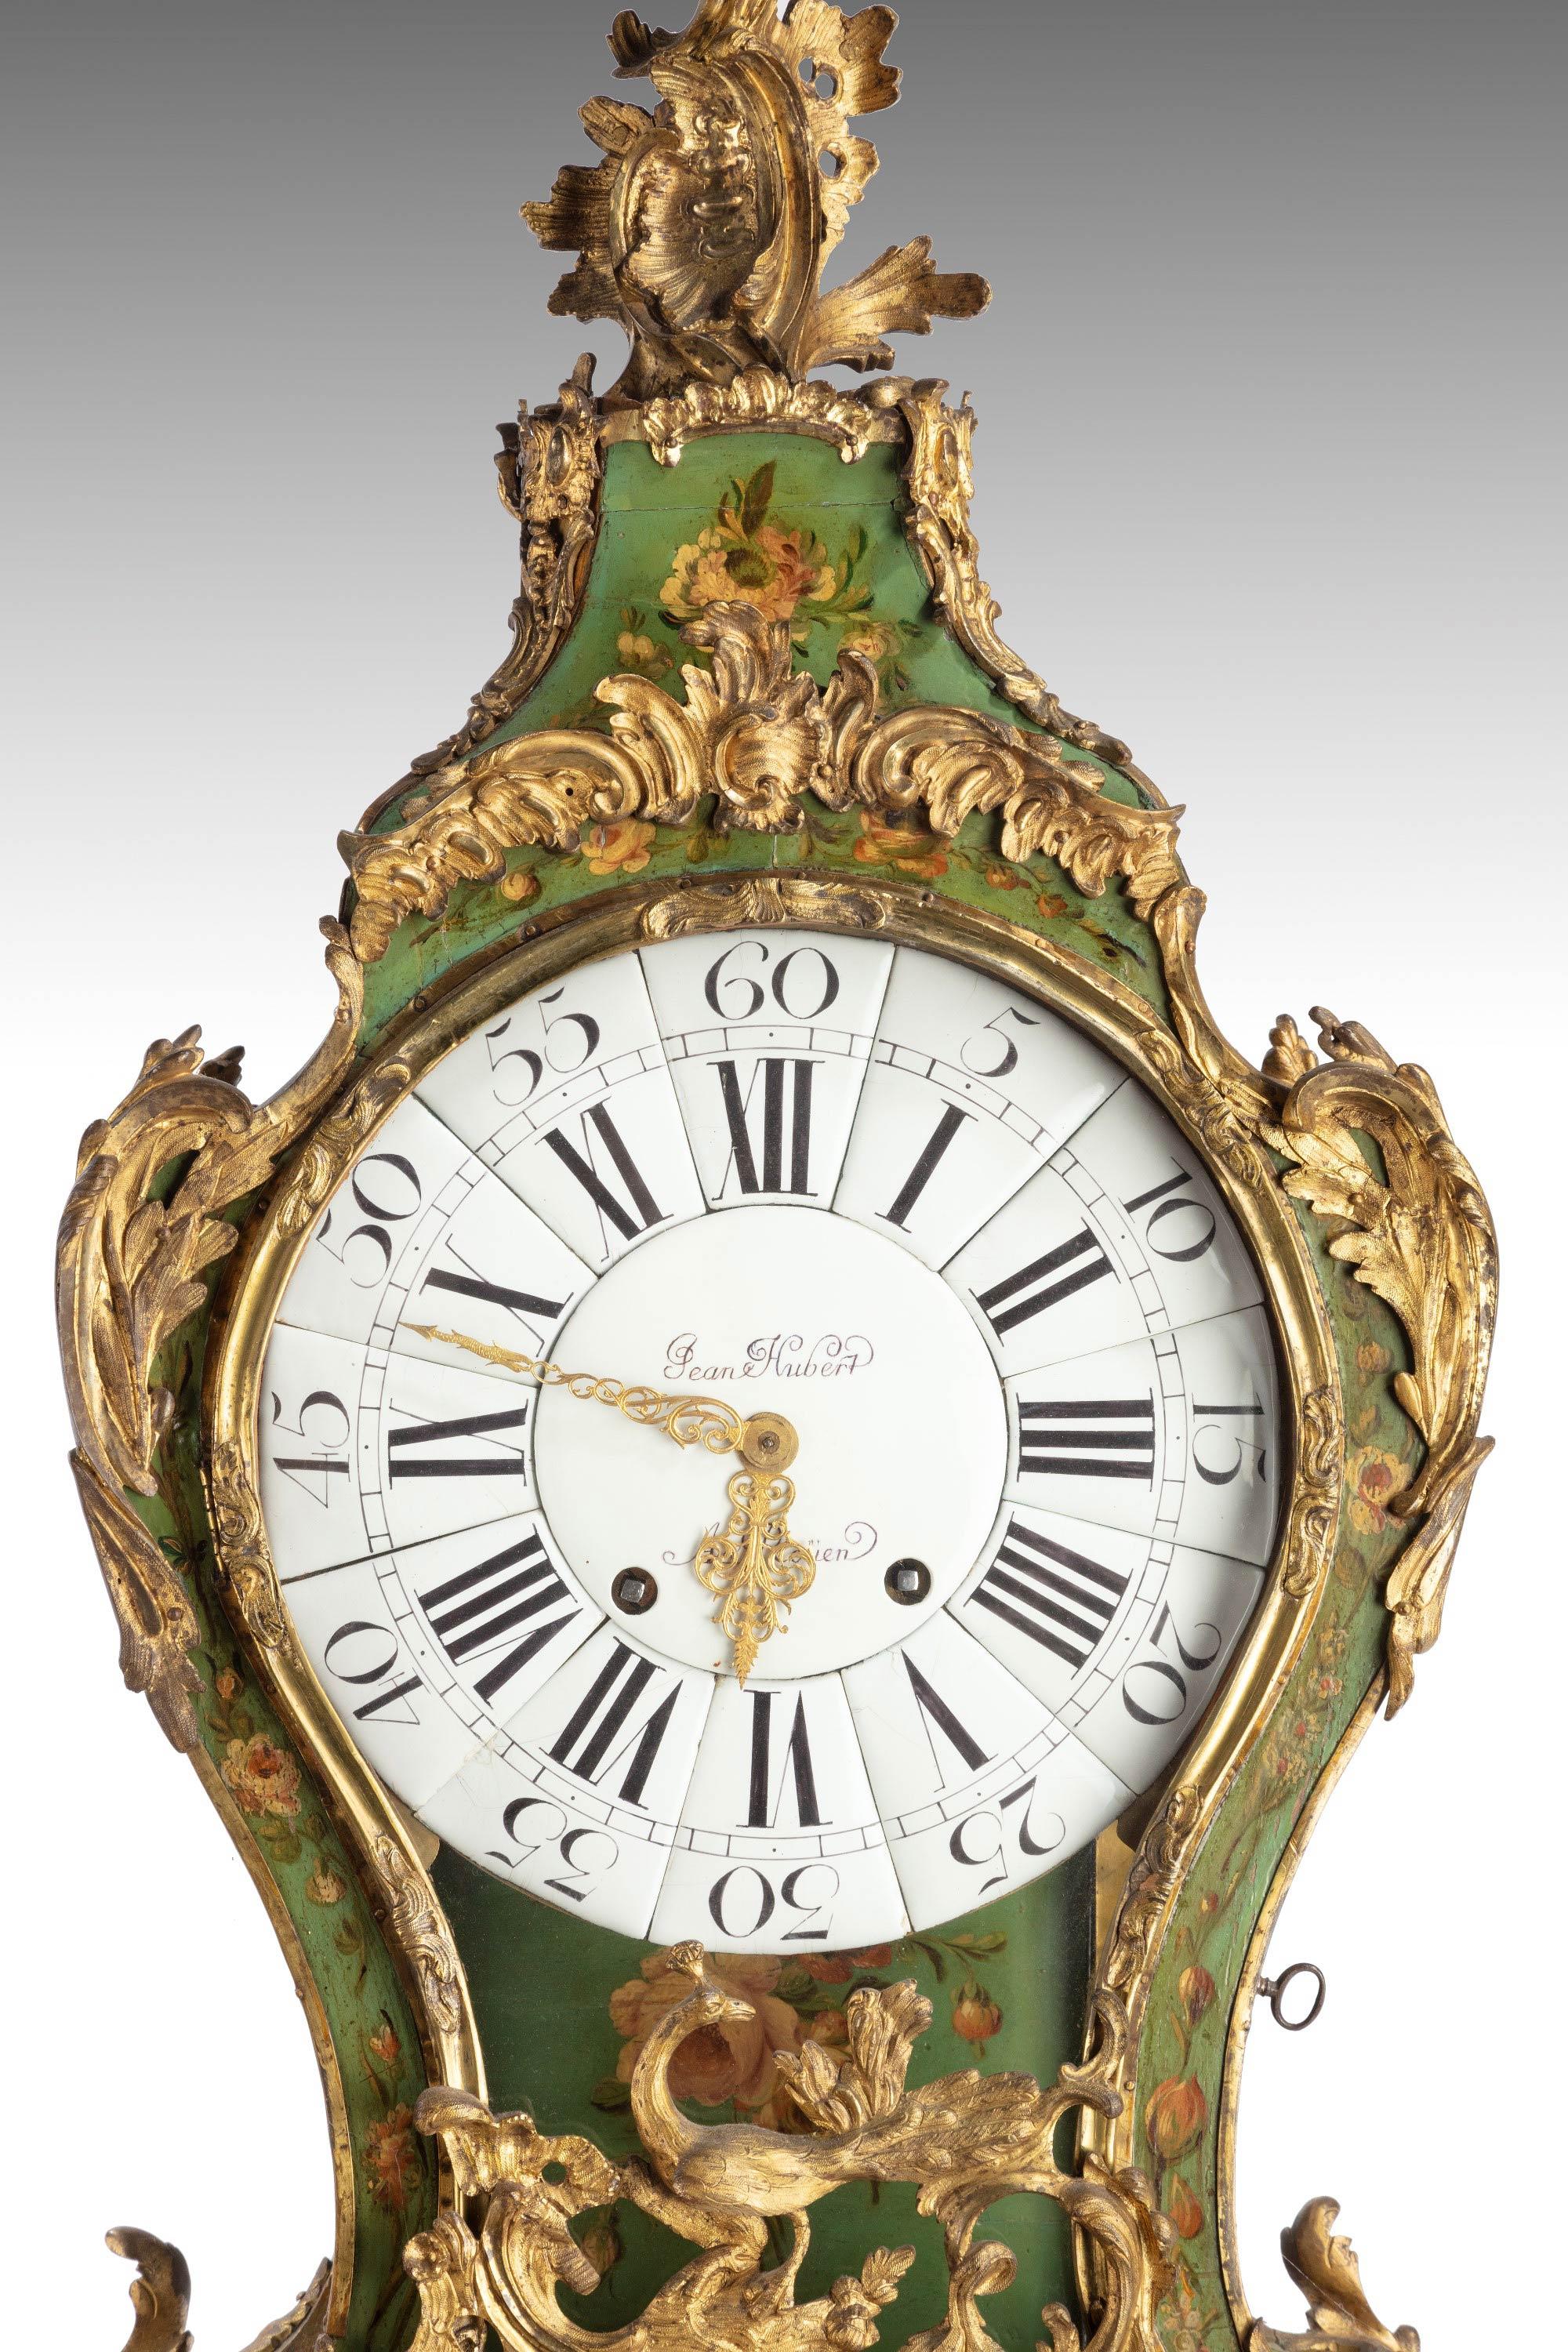 Quite Exceptional 18th Century Cartel Clock by Jean Hubert In Good Condition In Peterborough, Northamptonshire